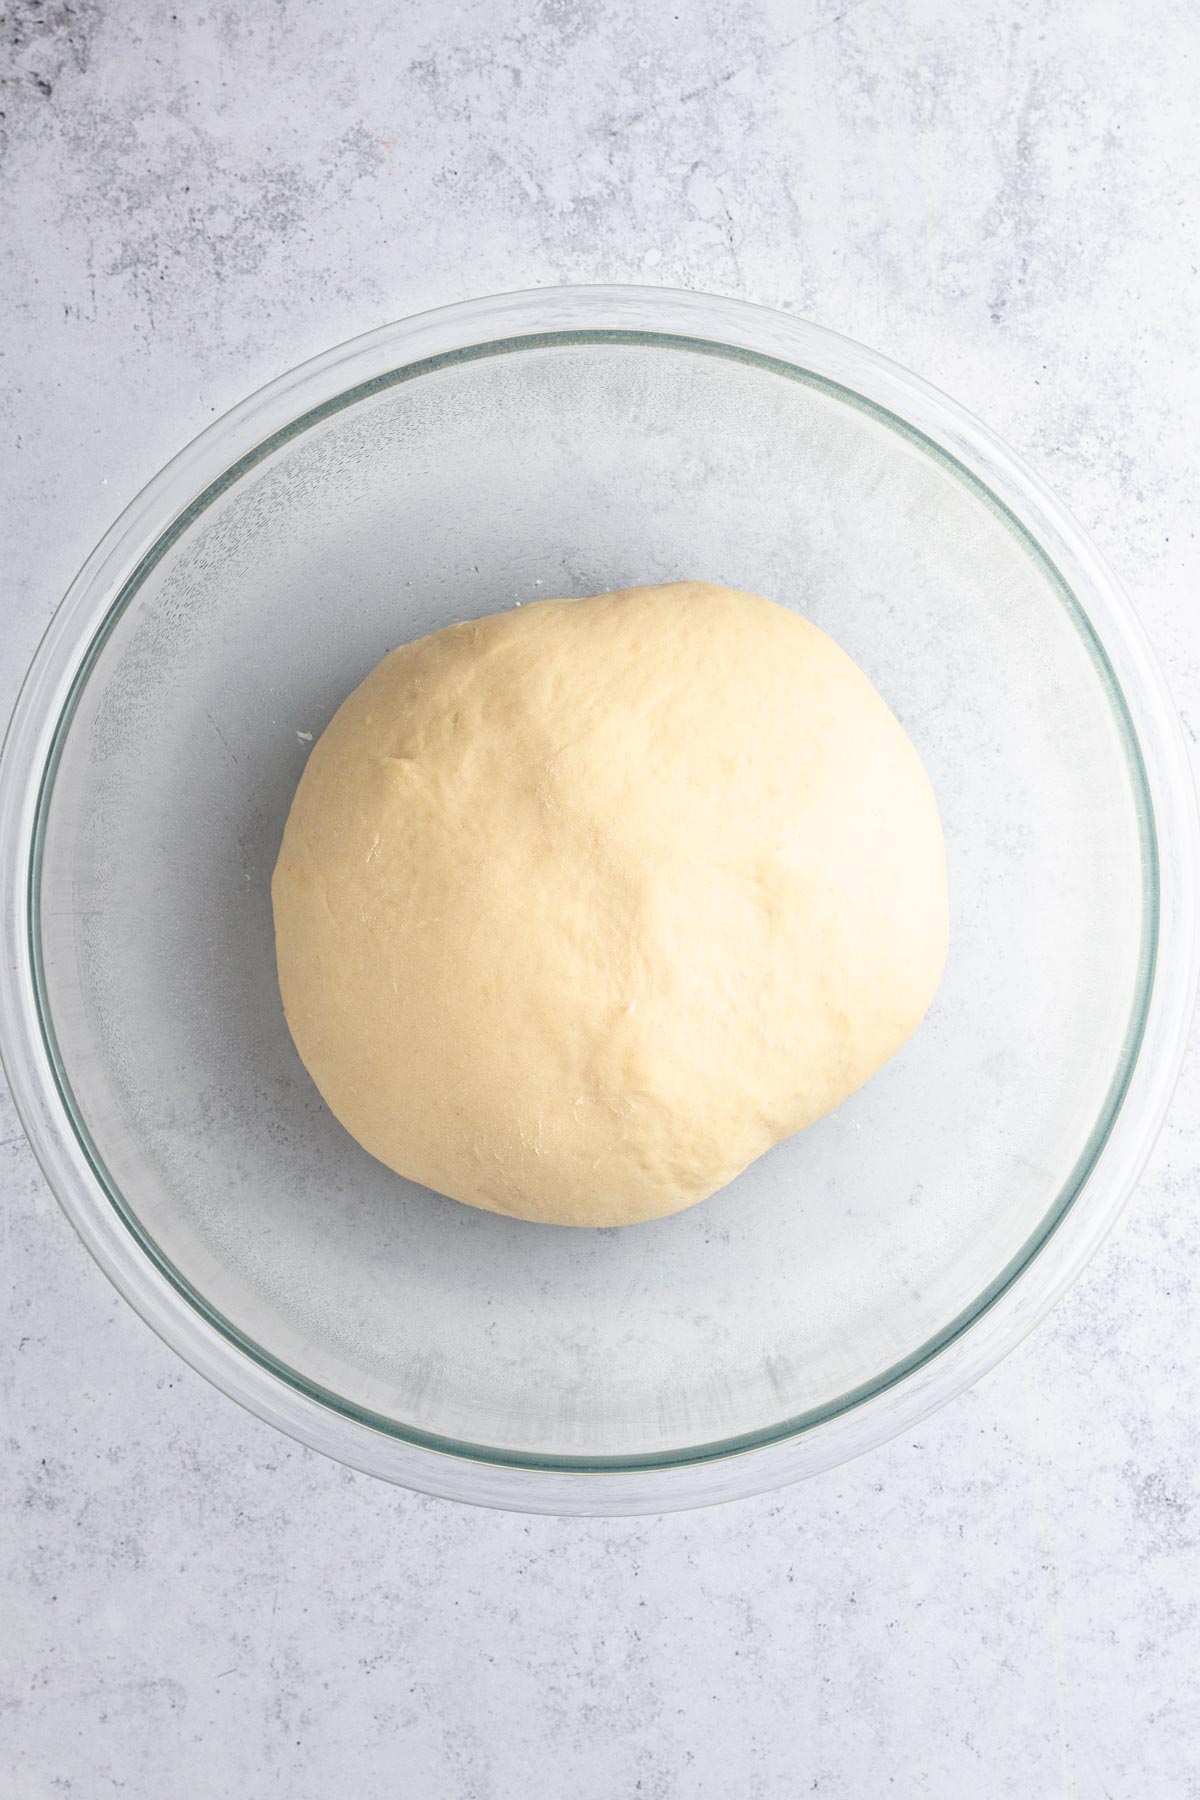 Risen ball of dough in a glass bowl on a gray surface.